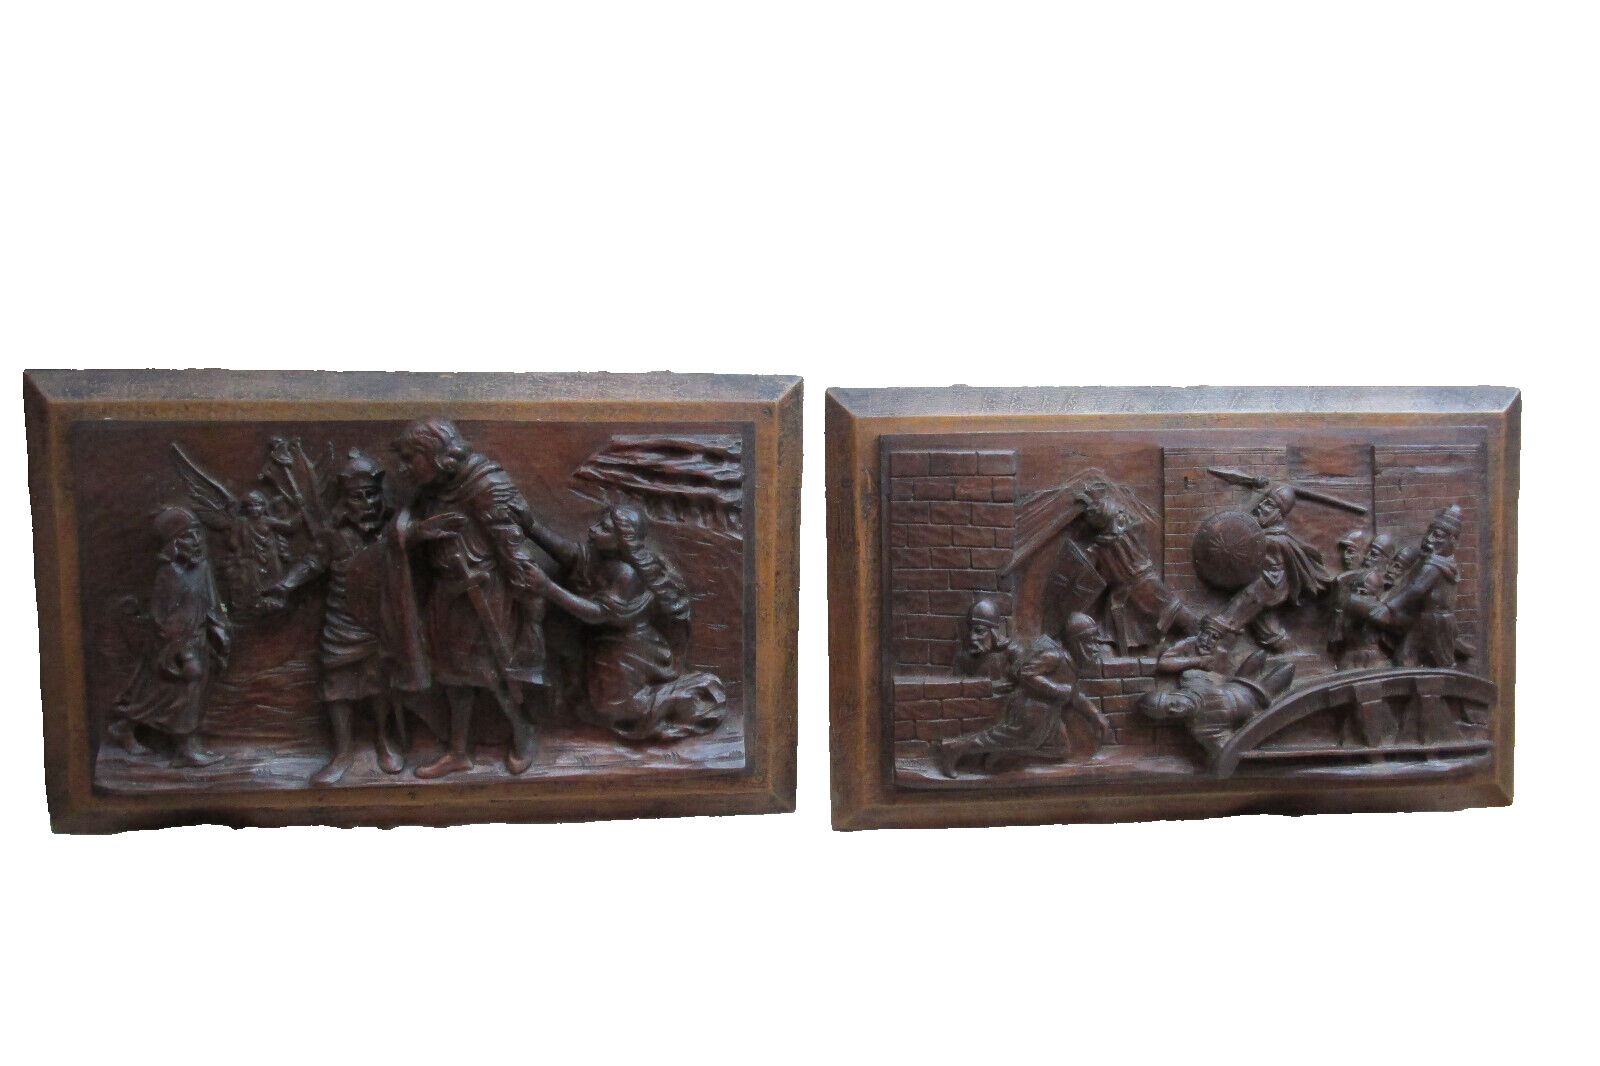 Two Altarpieces Antique  C1800 Walnut Wood represent The Crusaders in Jerusalem